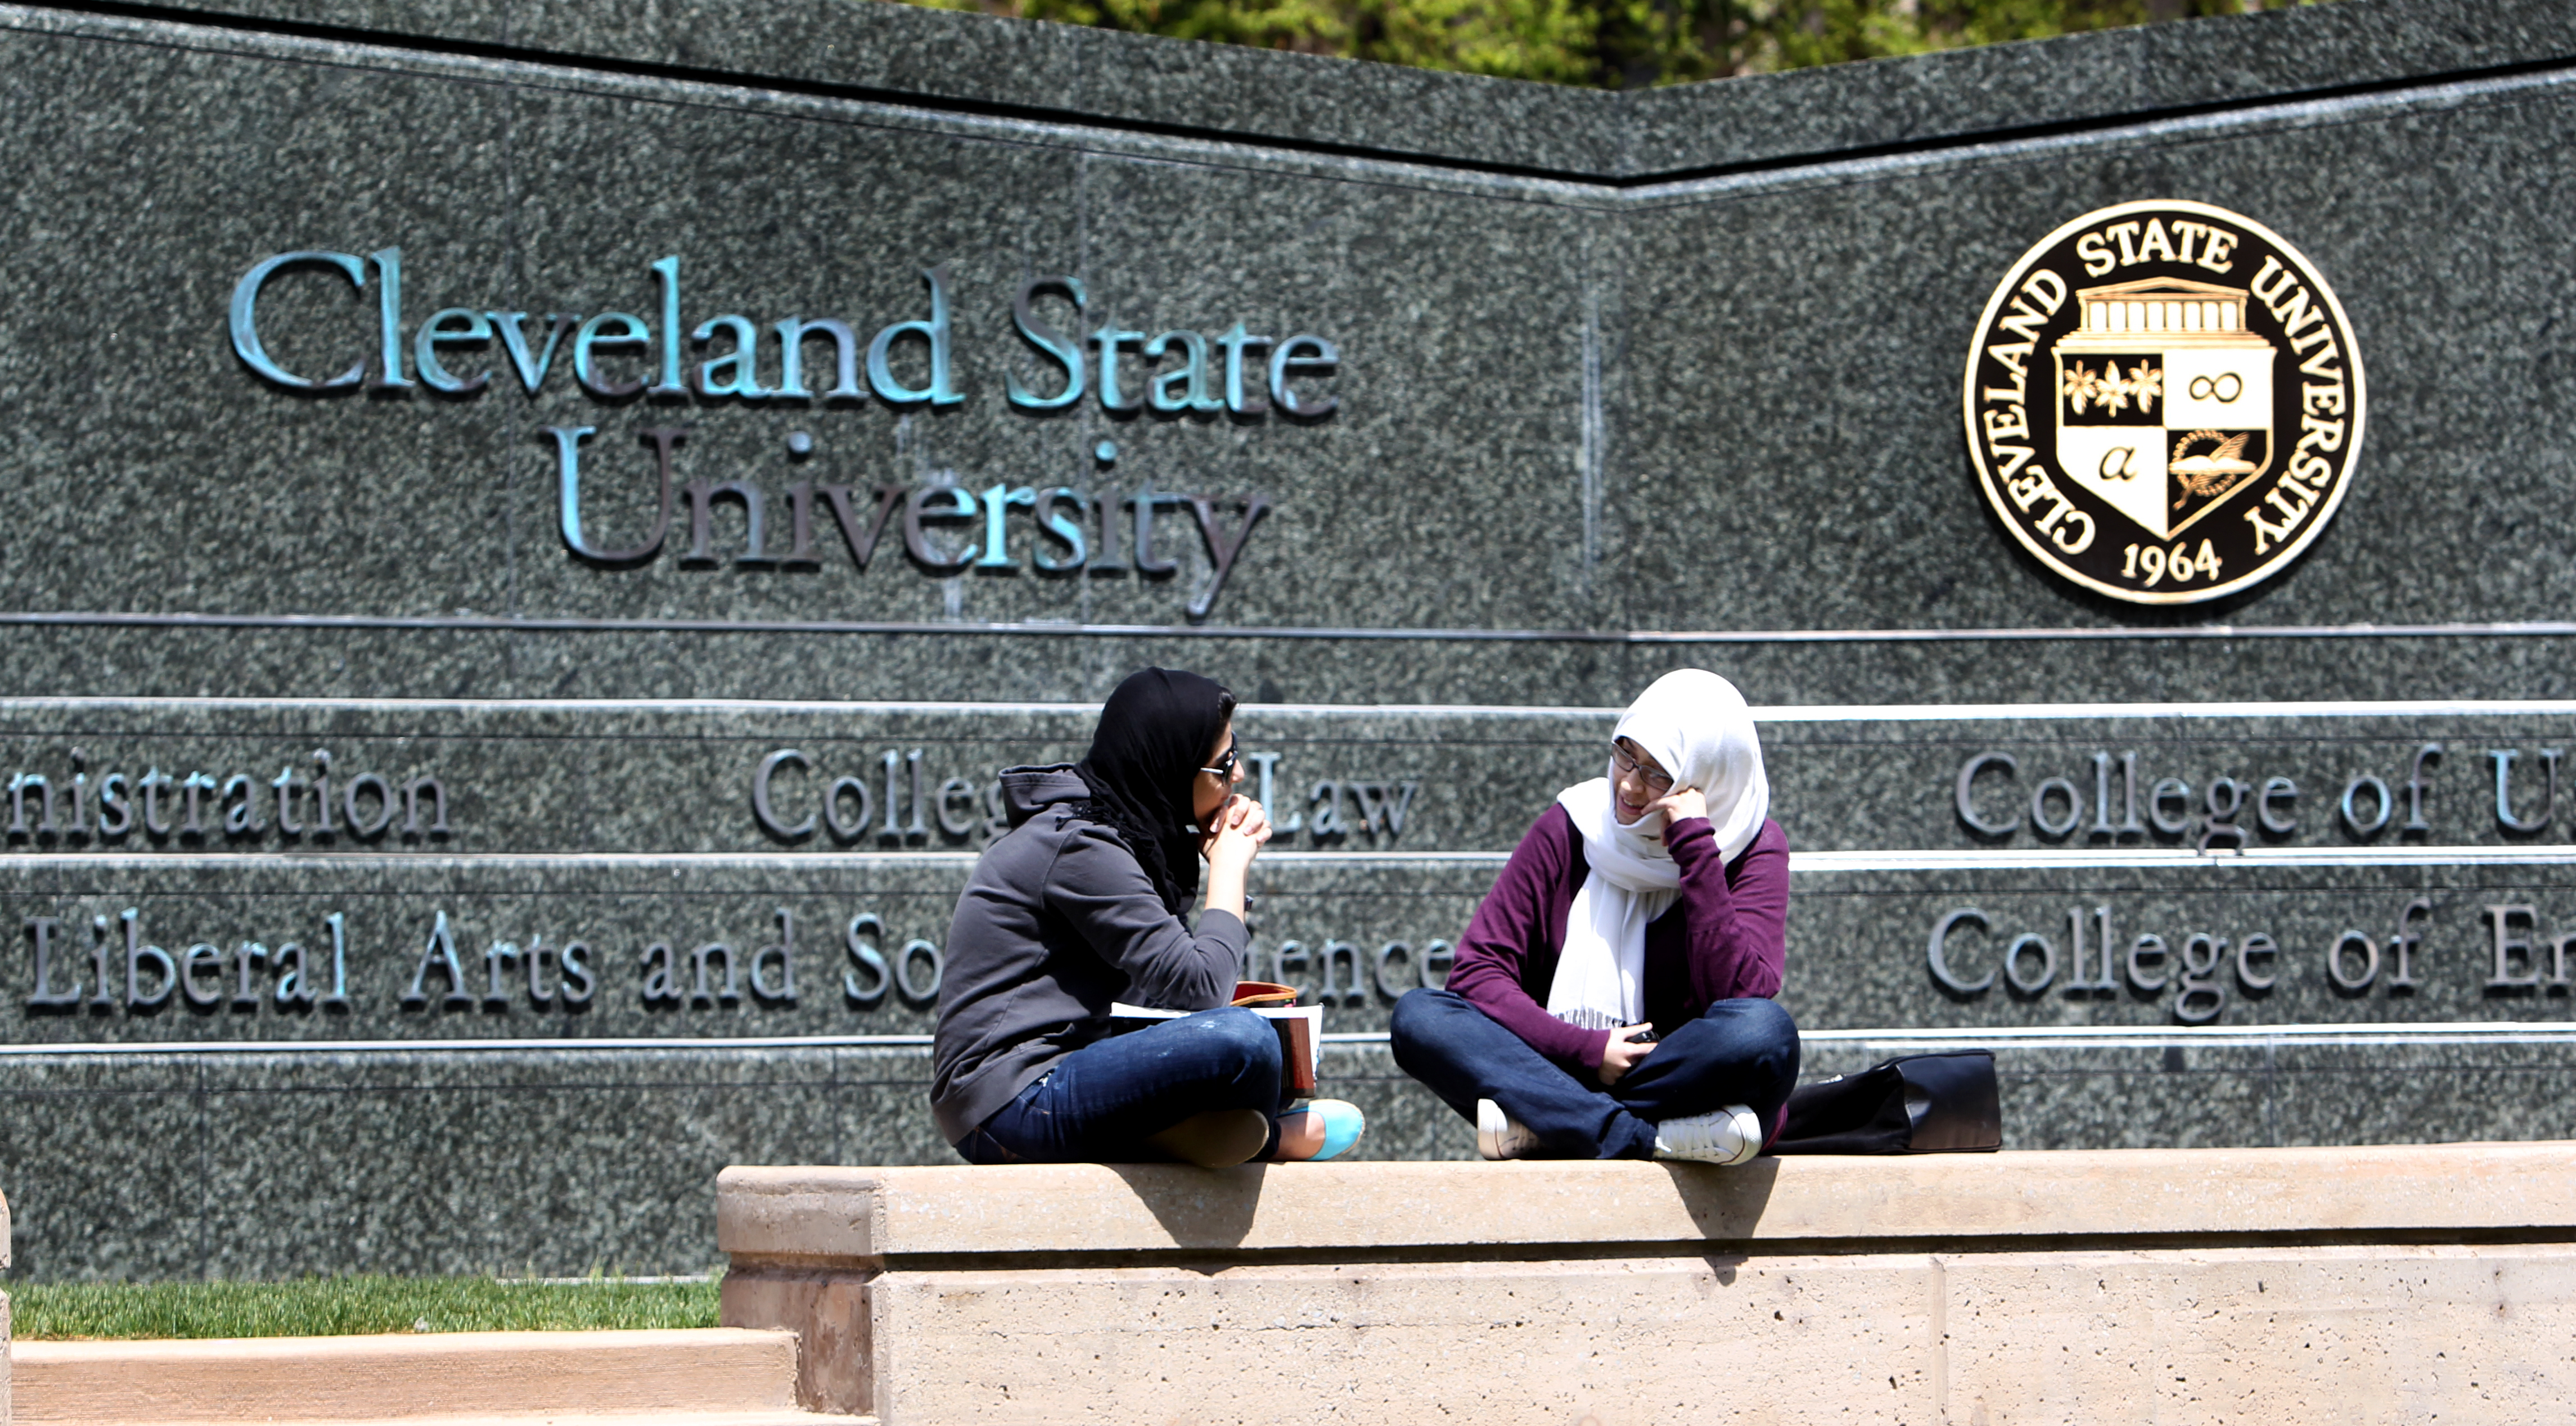 Ohio State is best public university in the state, according to